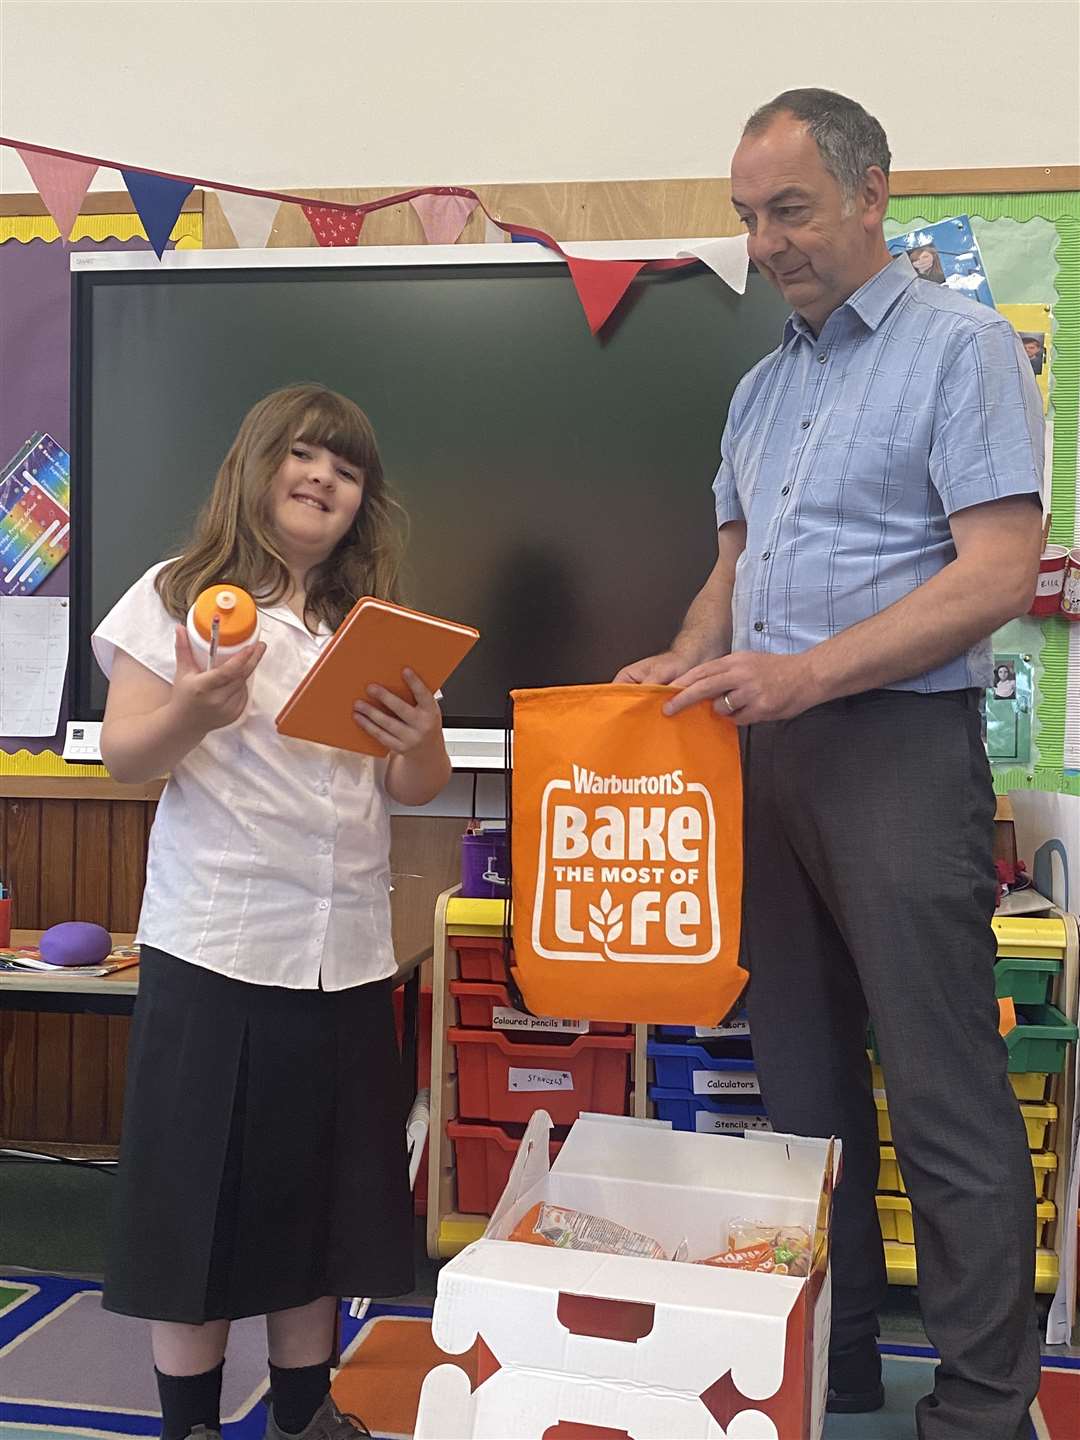 Warburtons has been a long supporter of food education and through The Warburtons Foundation, developed “Bake the Most of Life,” a free online education platform, to support both primary and secondary schools with curriculum linked classroom resources.